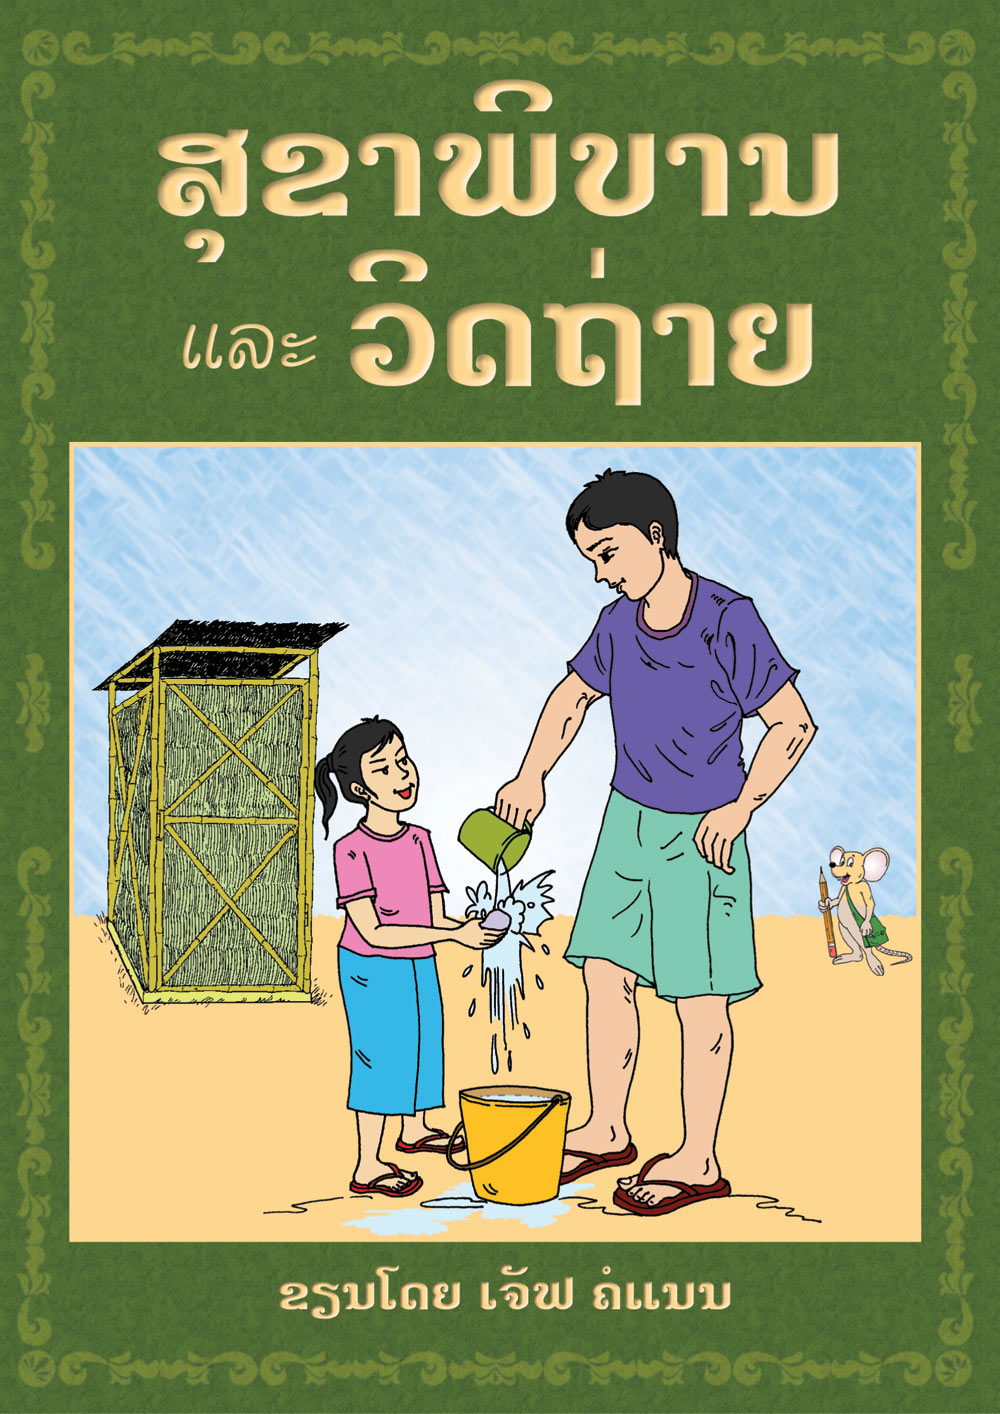 Sanitation and Toilets large book cover, published in Lao language